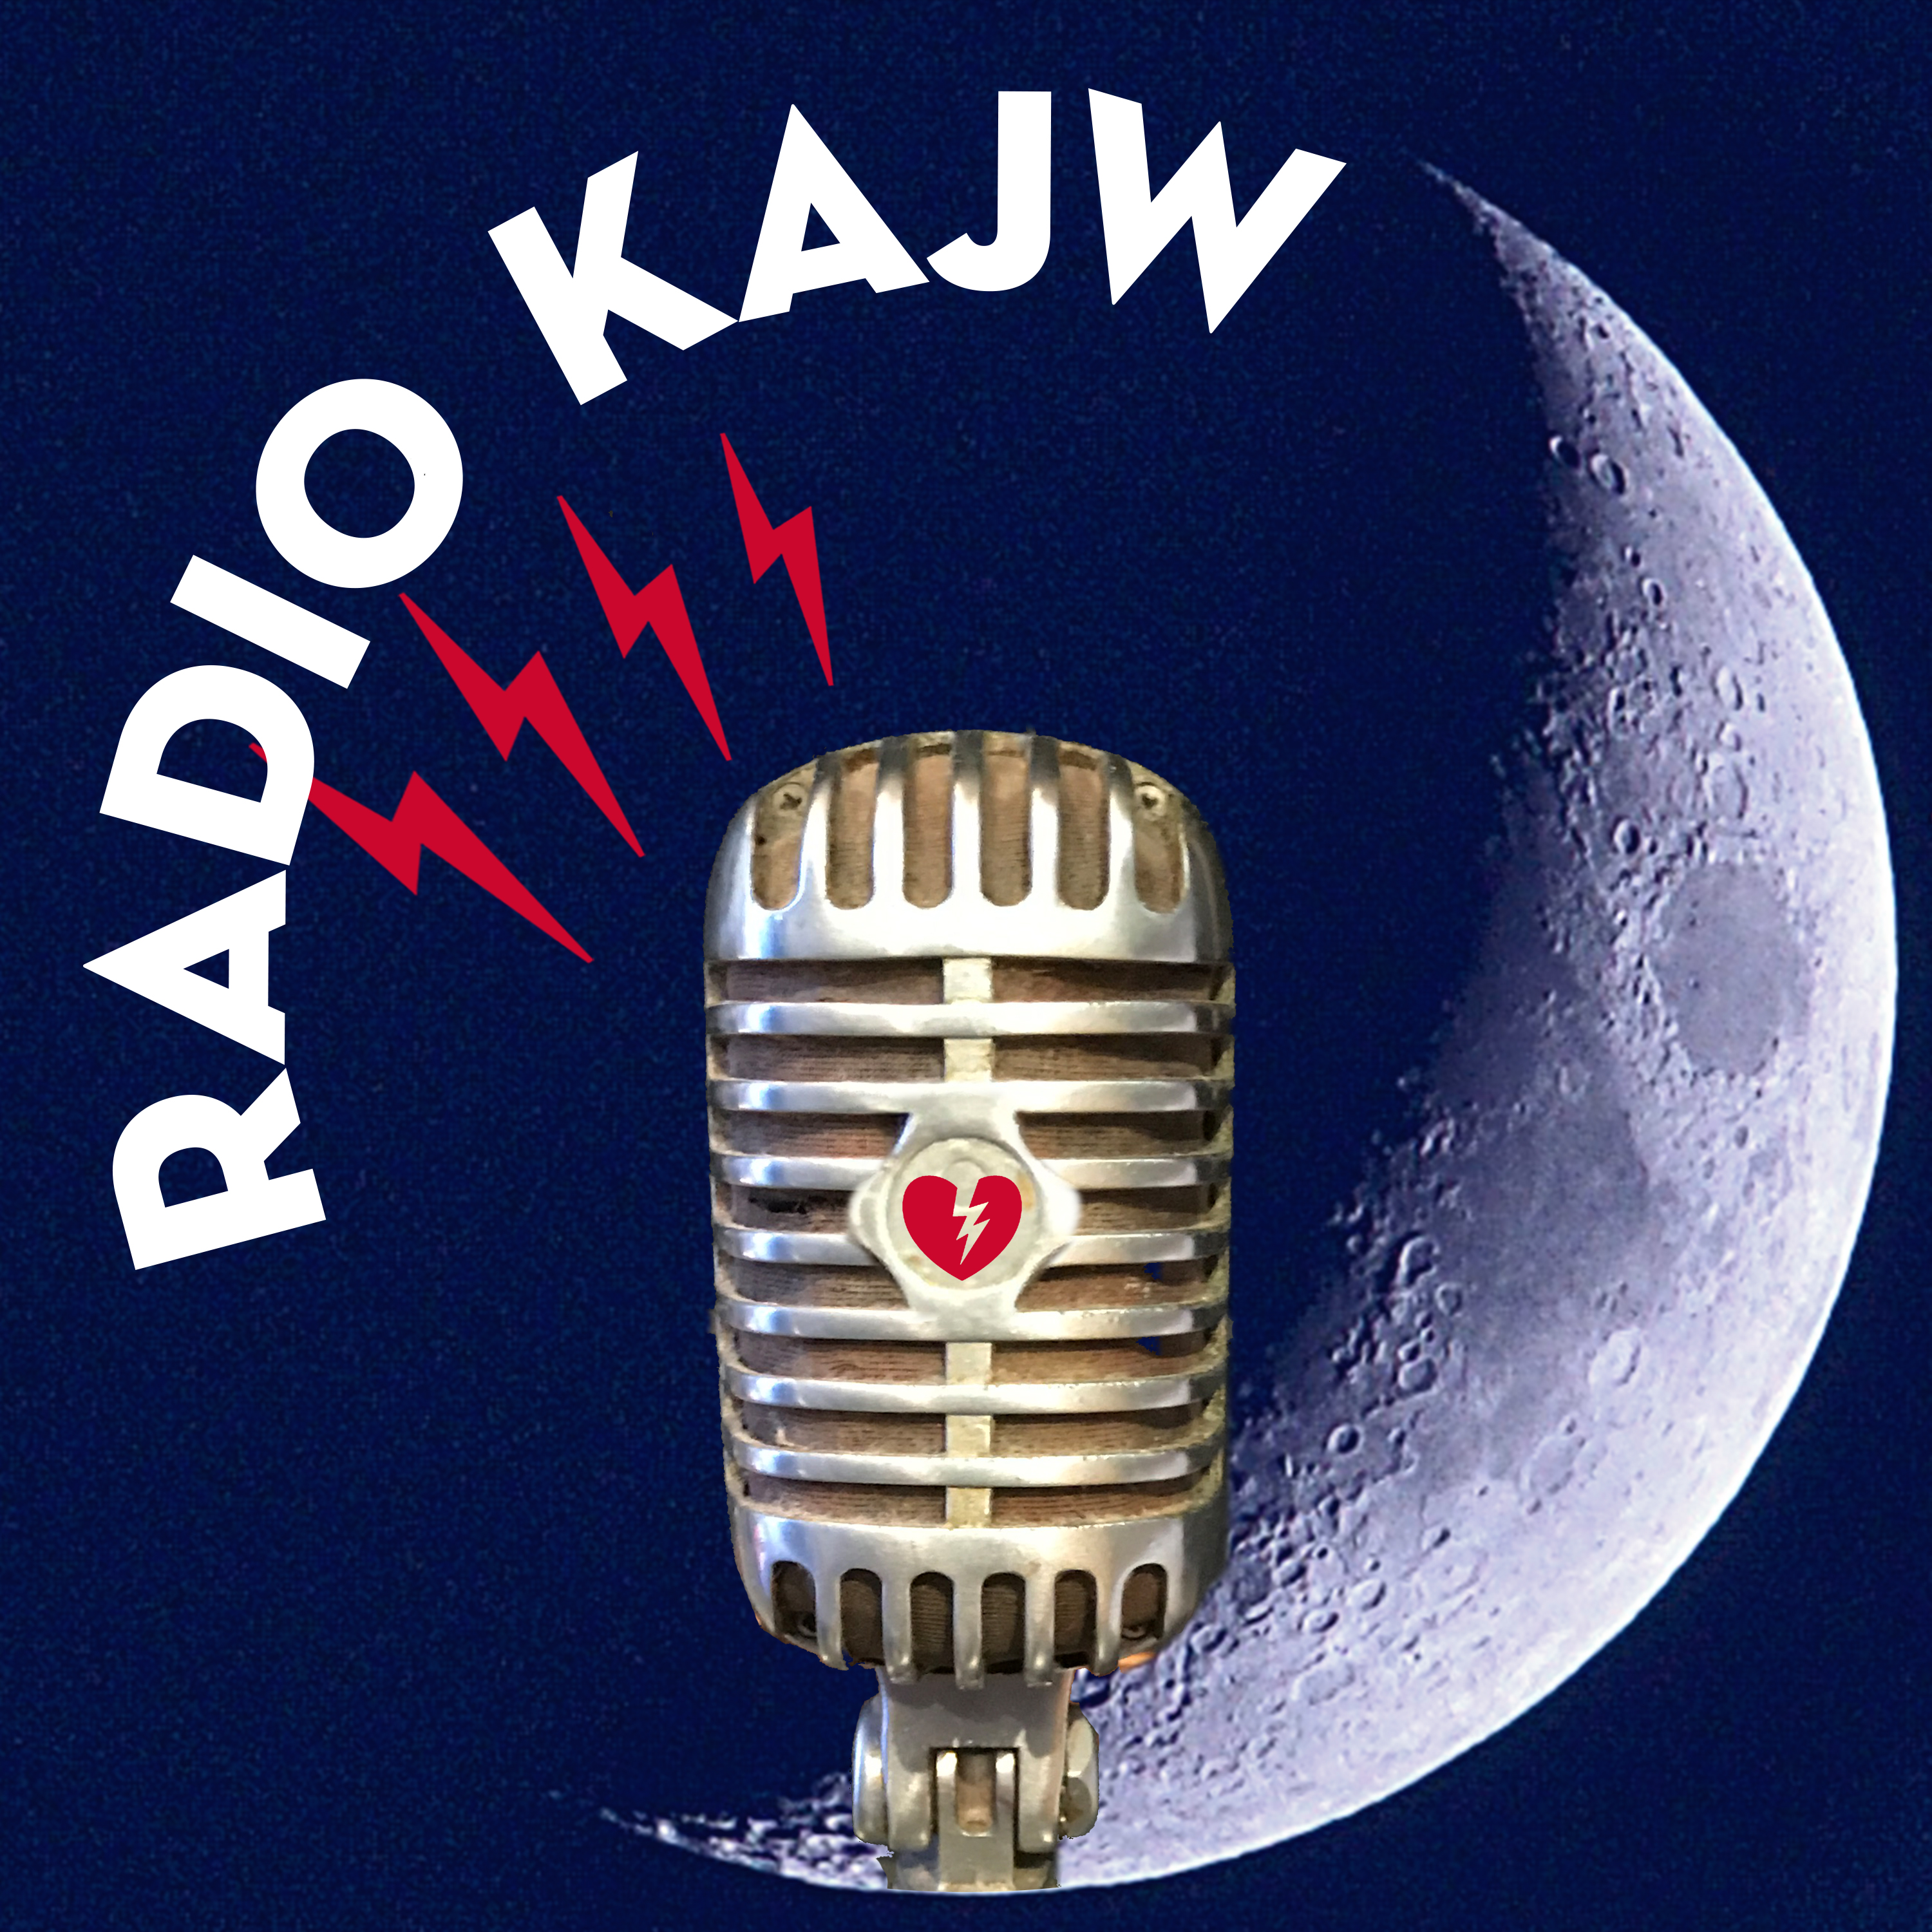 Art for This is radio KAJW by A.J. Weiner